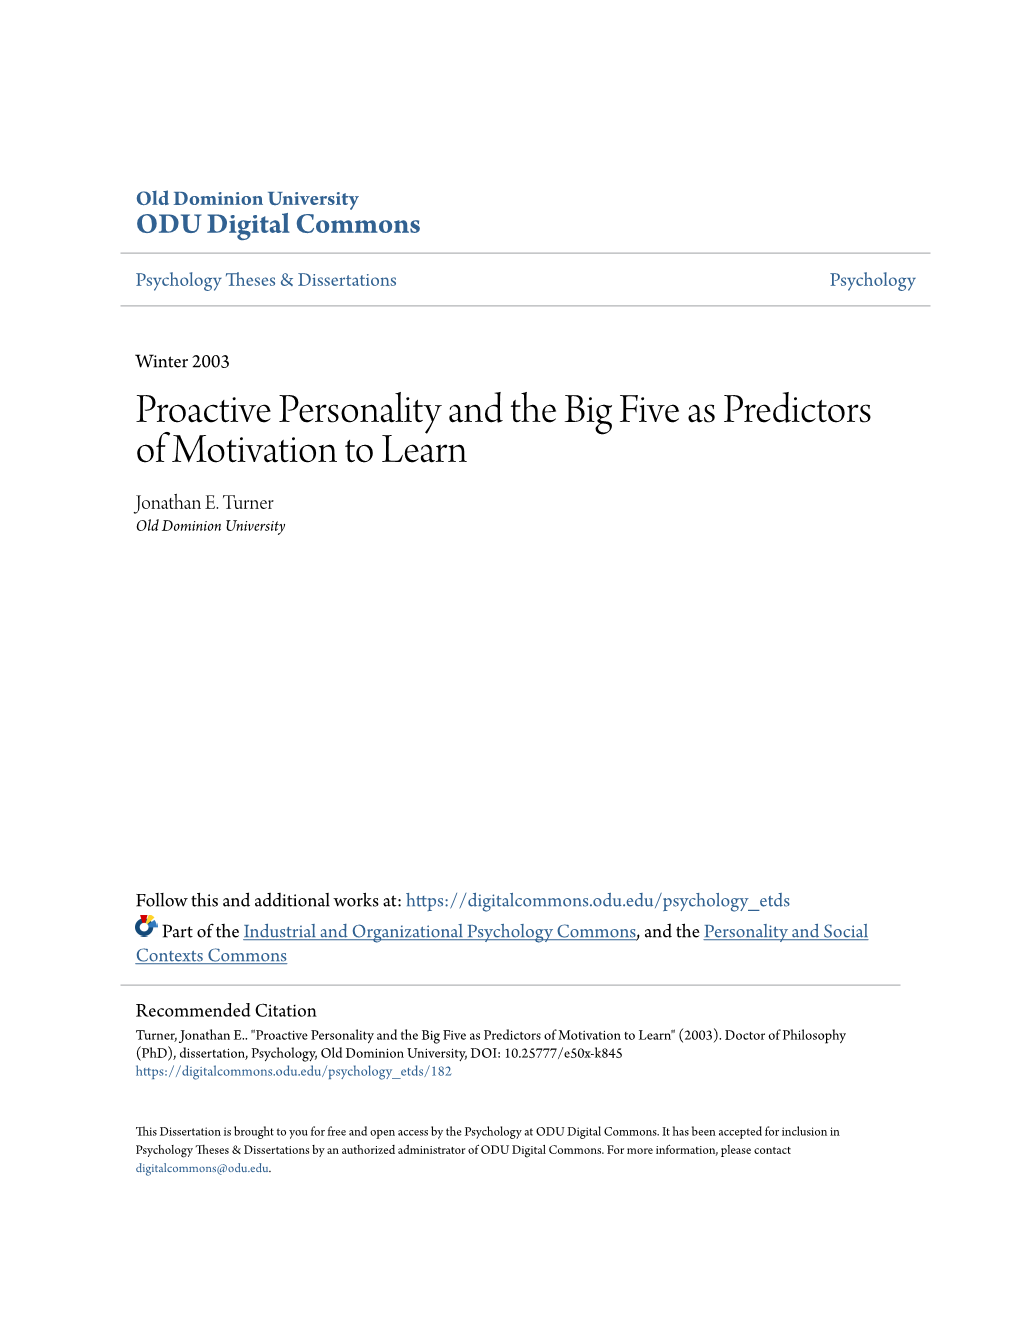 Proactive Personality and the Big Five As Predictors of Motivation to Learn Jonathan E